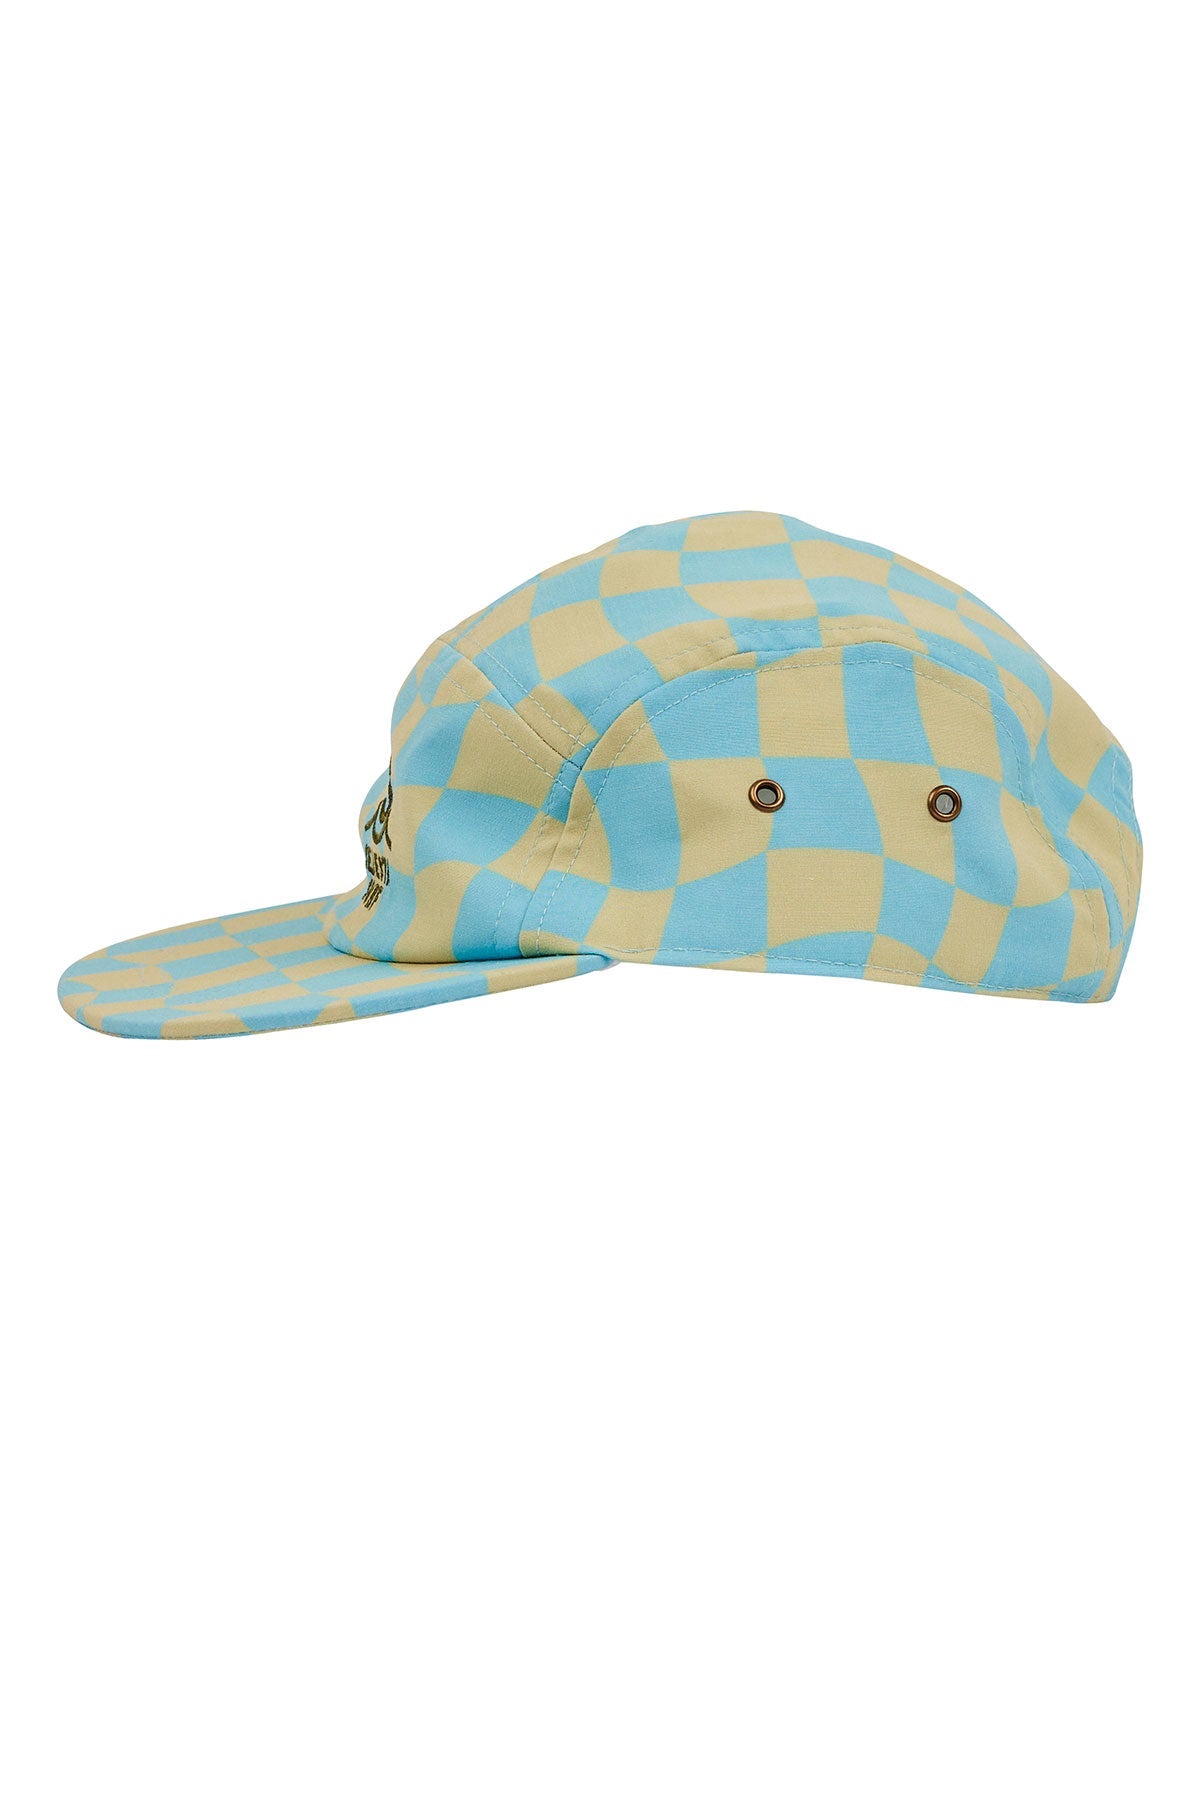 Check it out! Custom wavy checker print made exclusively for Seaesta Surf, perfect for sea-loving sidewalk surfers. Seaesta Surf kids five panel hats are earth and performance conscious, featuring eco-friendly fabrics and a full brim to keep your kiddos covered while they play